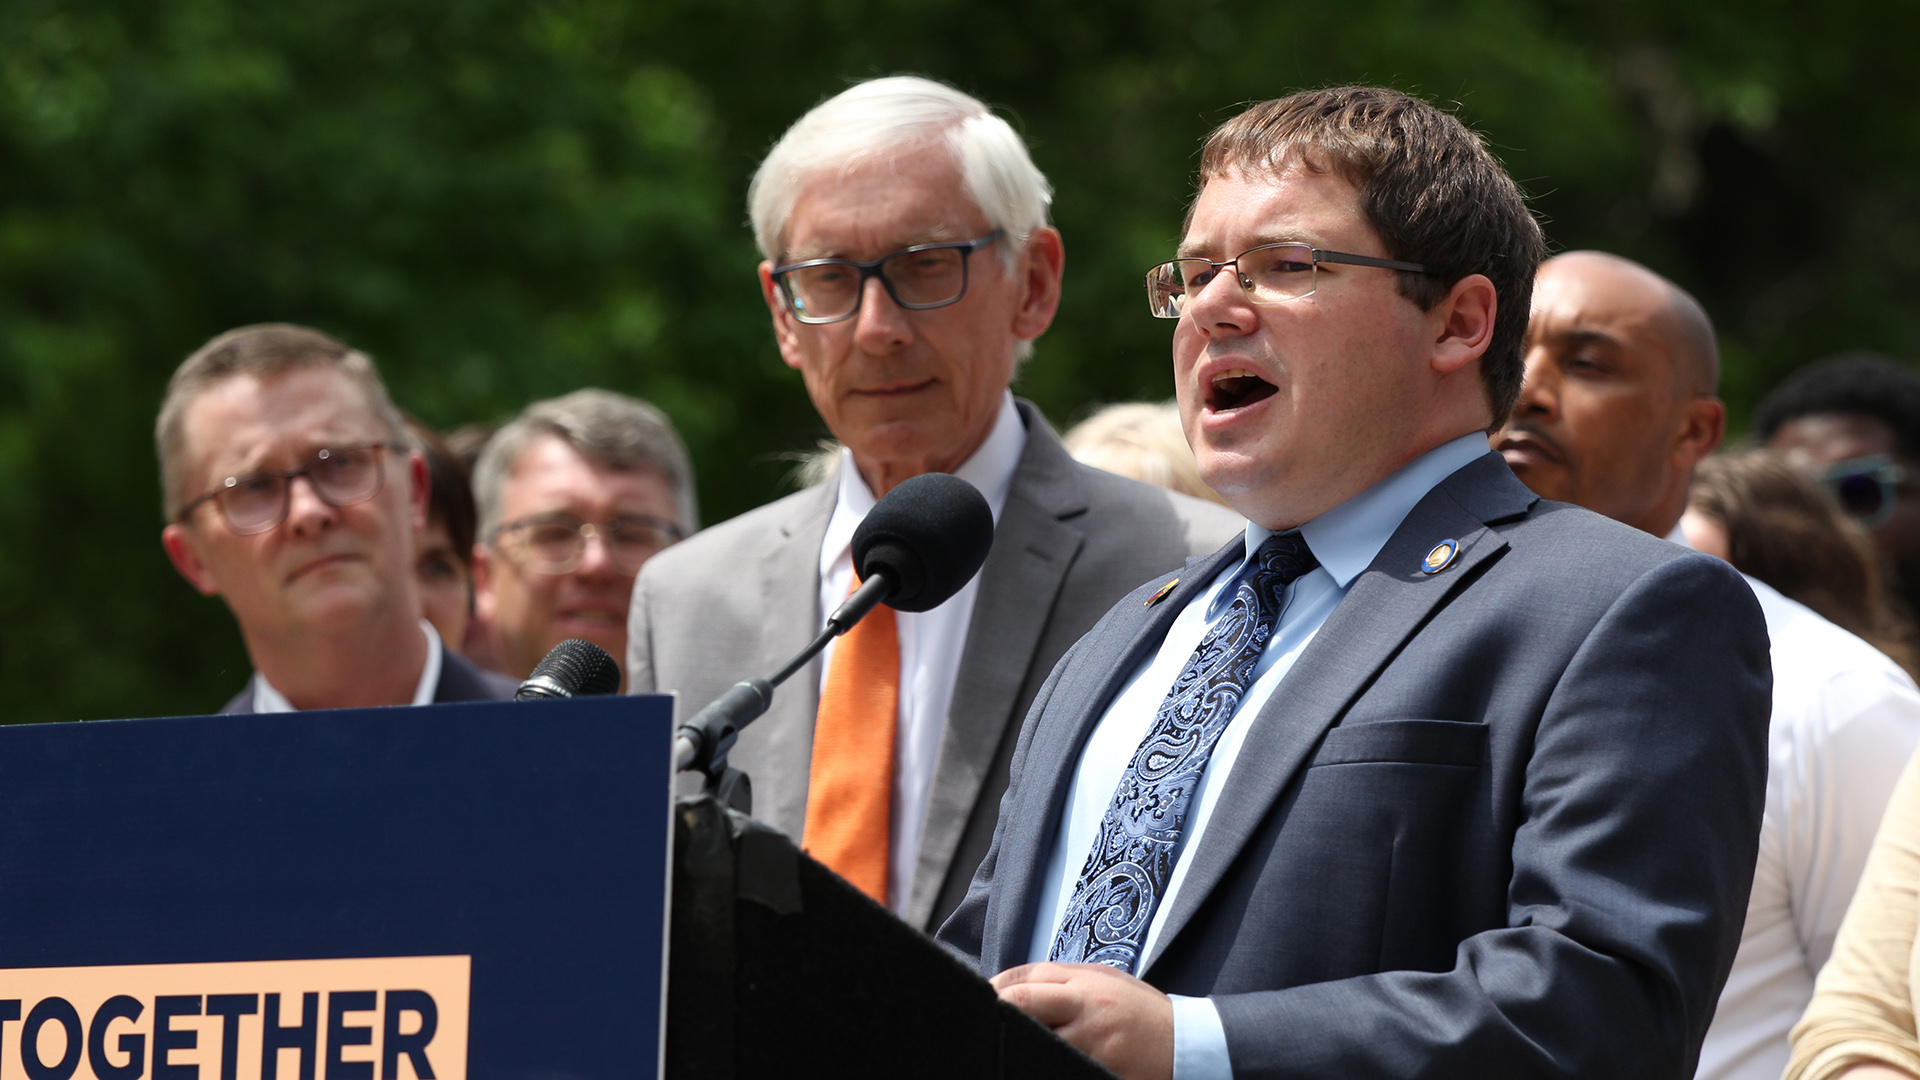 Mark Spreitzer stands behind a podium and speaks into a microphone, with Tony Evers and other people standing in the background.